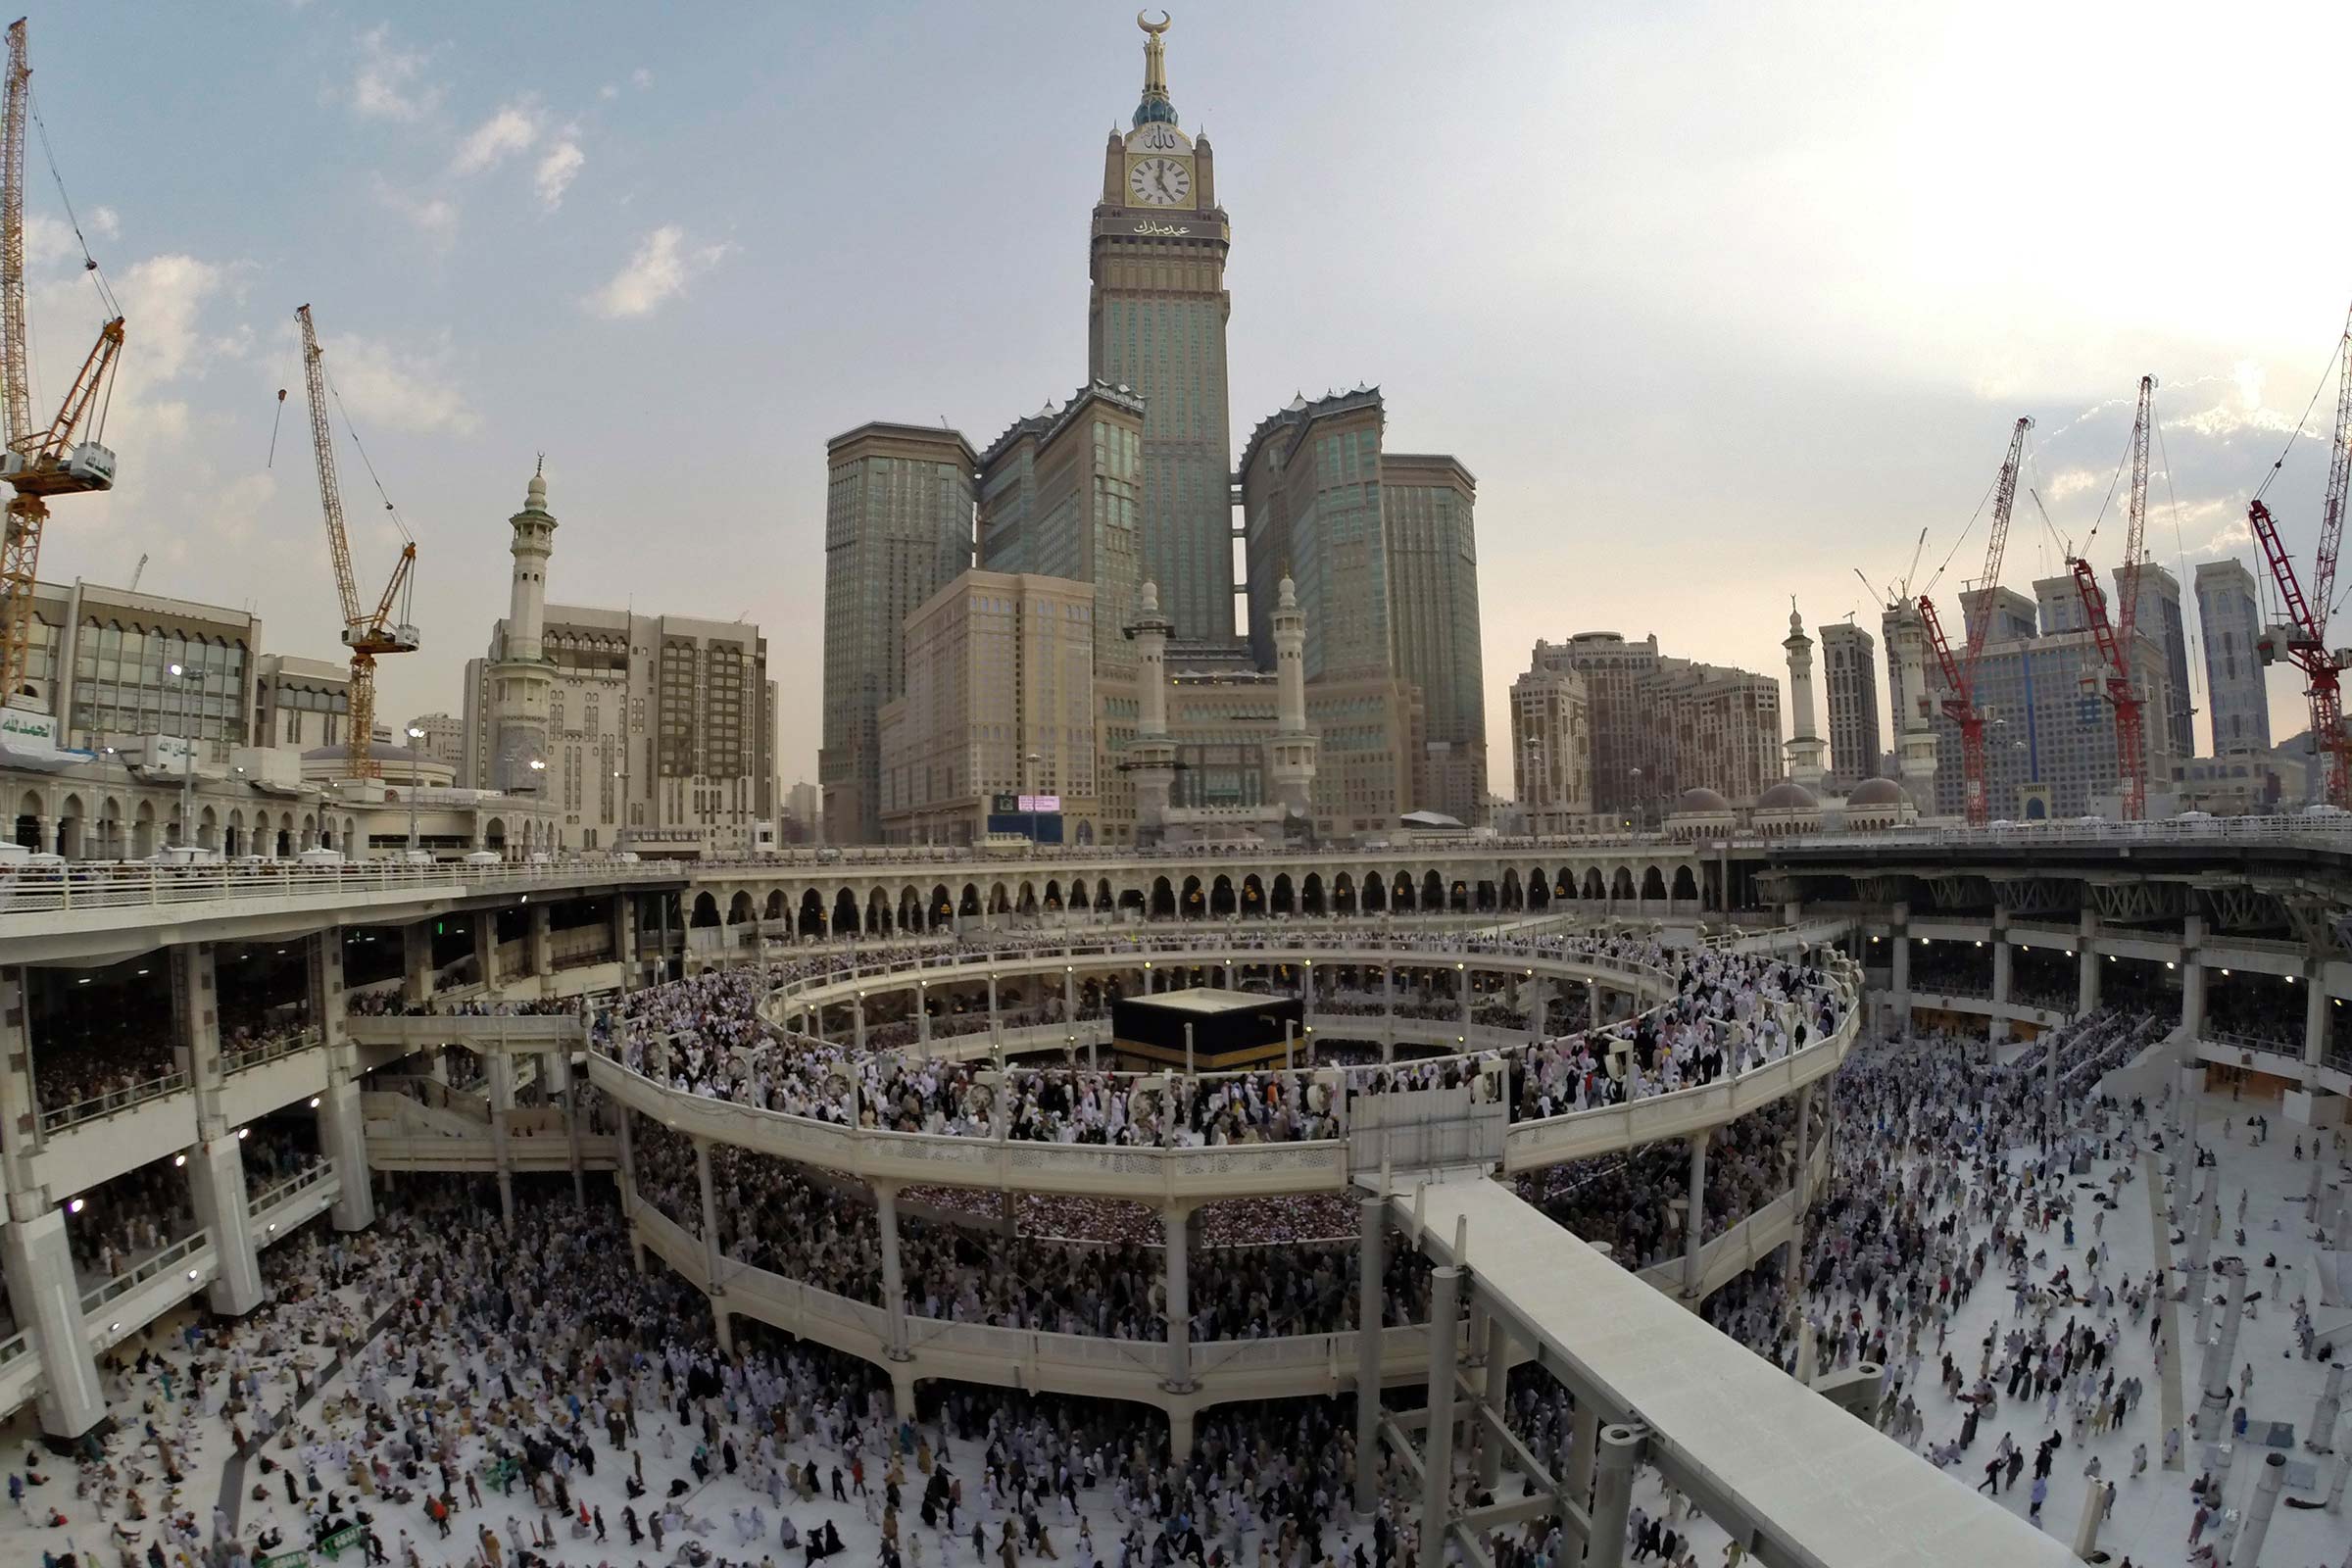 The Great Mosque in Mecca receives millions of Muslim worshippers each year.